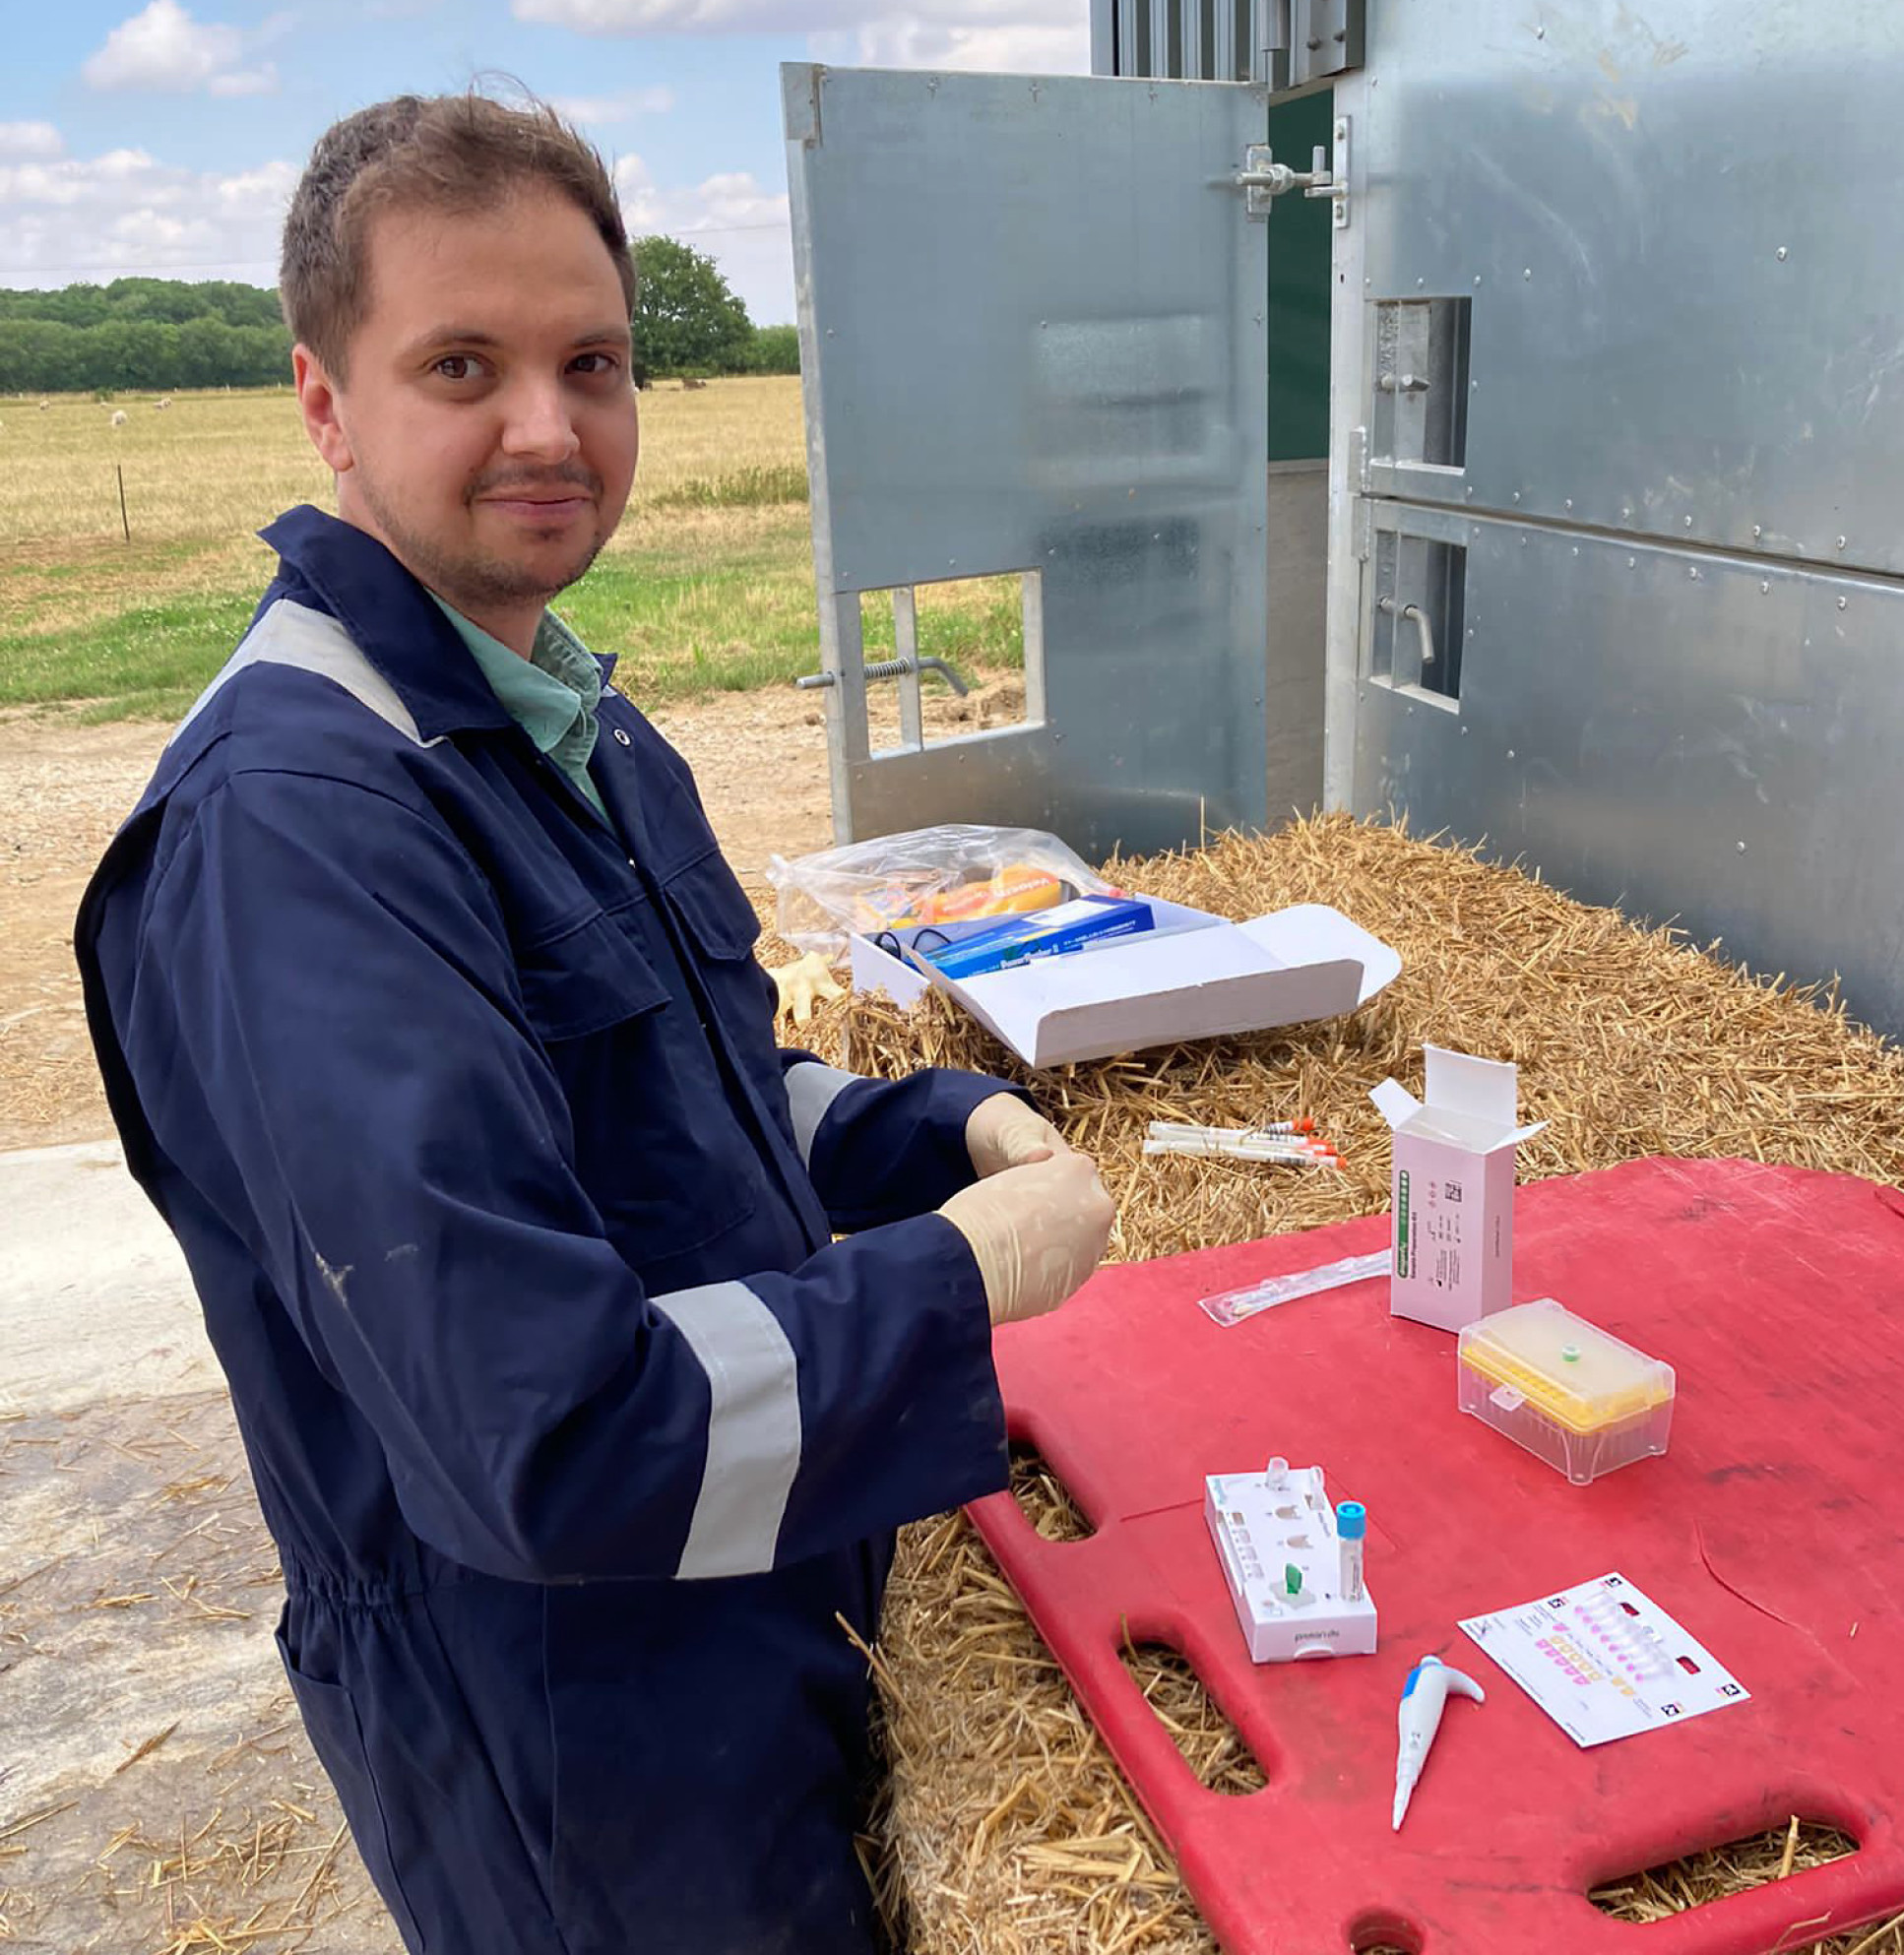 researcher carrying out test on farm